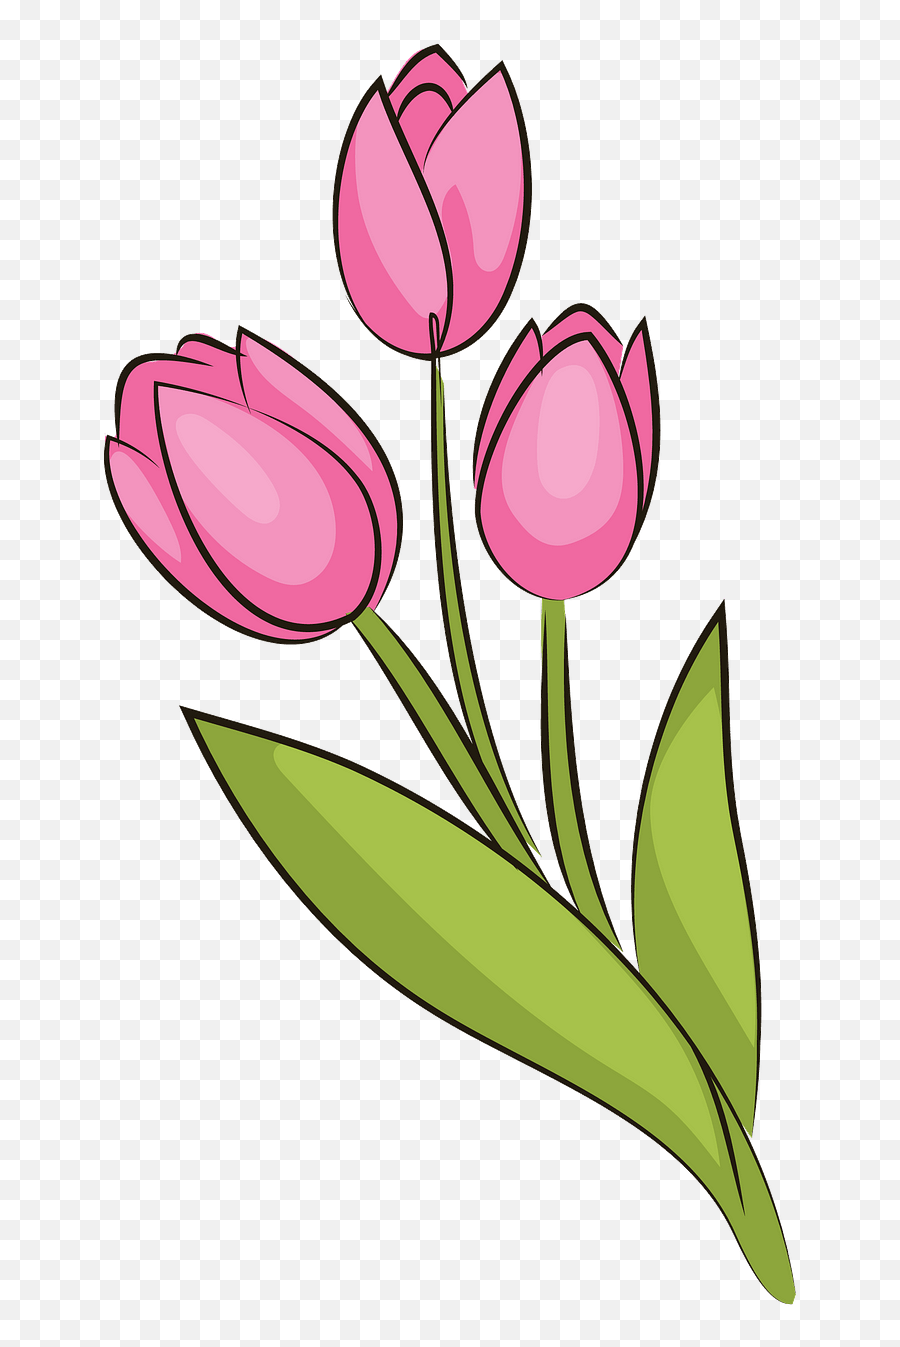 Tulips Clipart - Clip Art Library Emoji,What Is The New Tulip Shaped Emoji